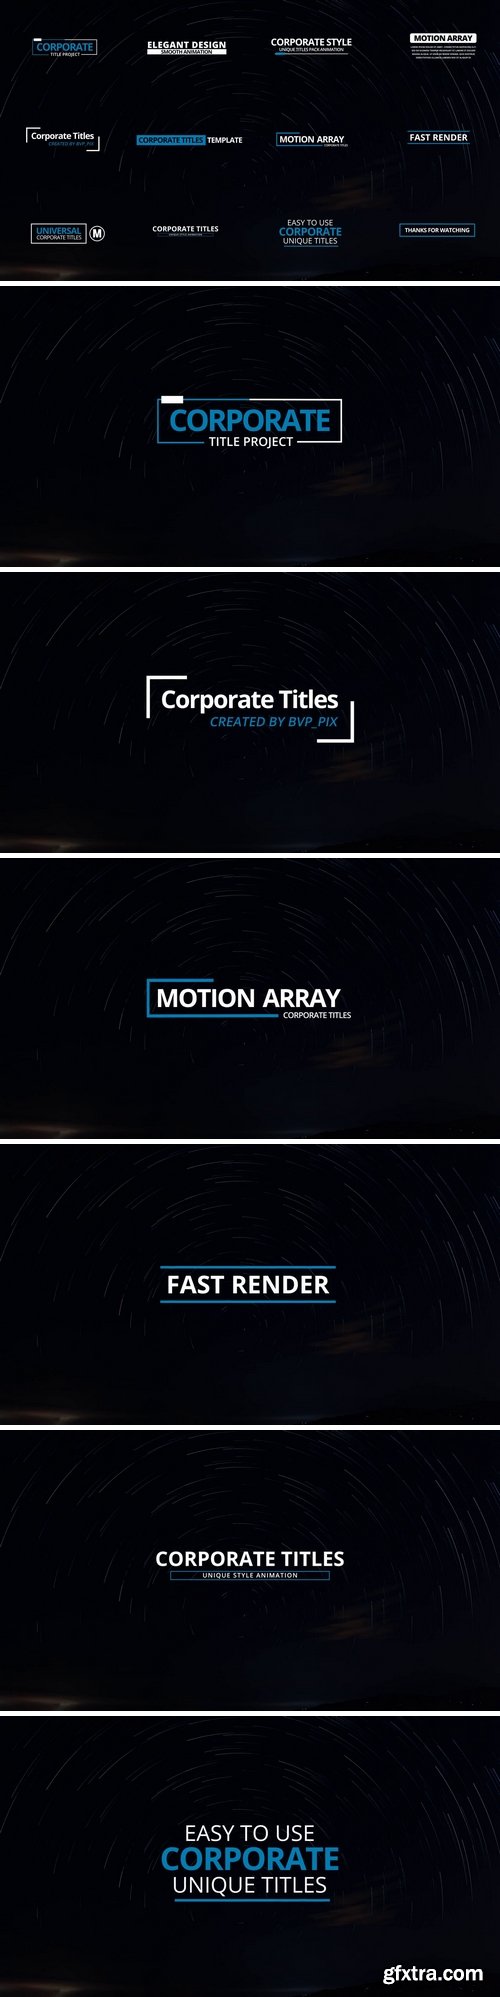 MotionArray - 12 Corporate Titles After Effects Templates 60256